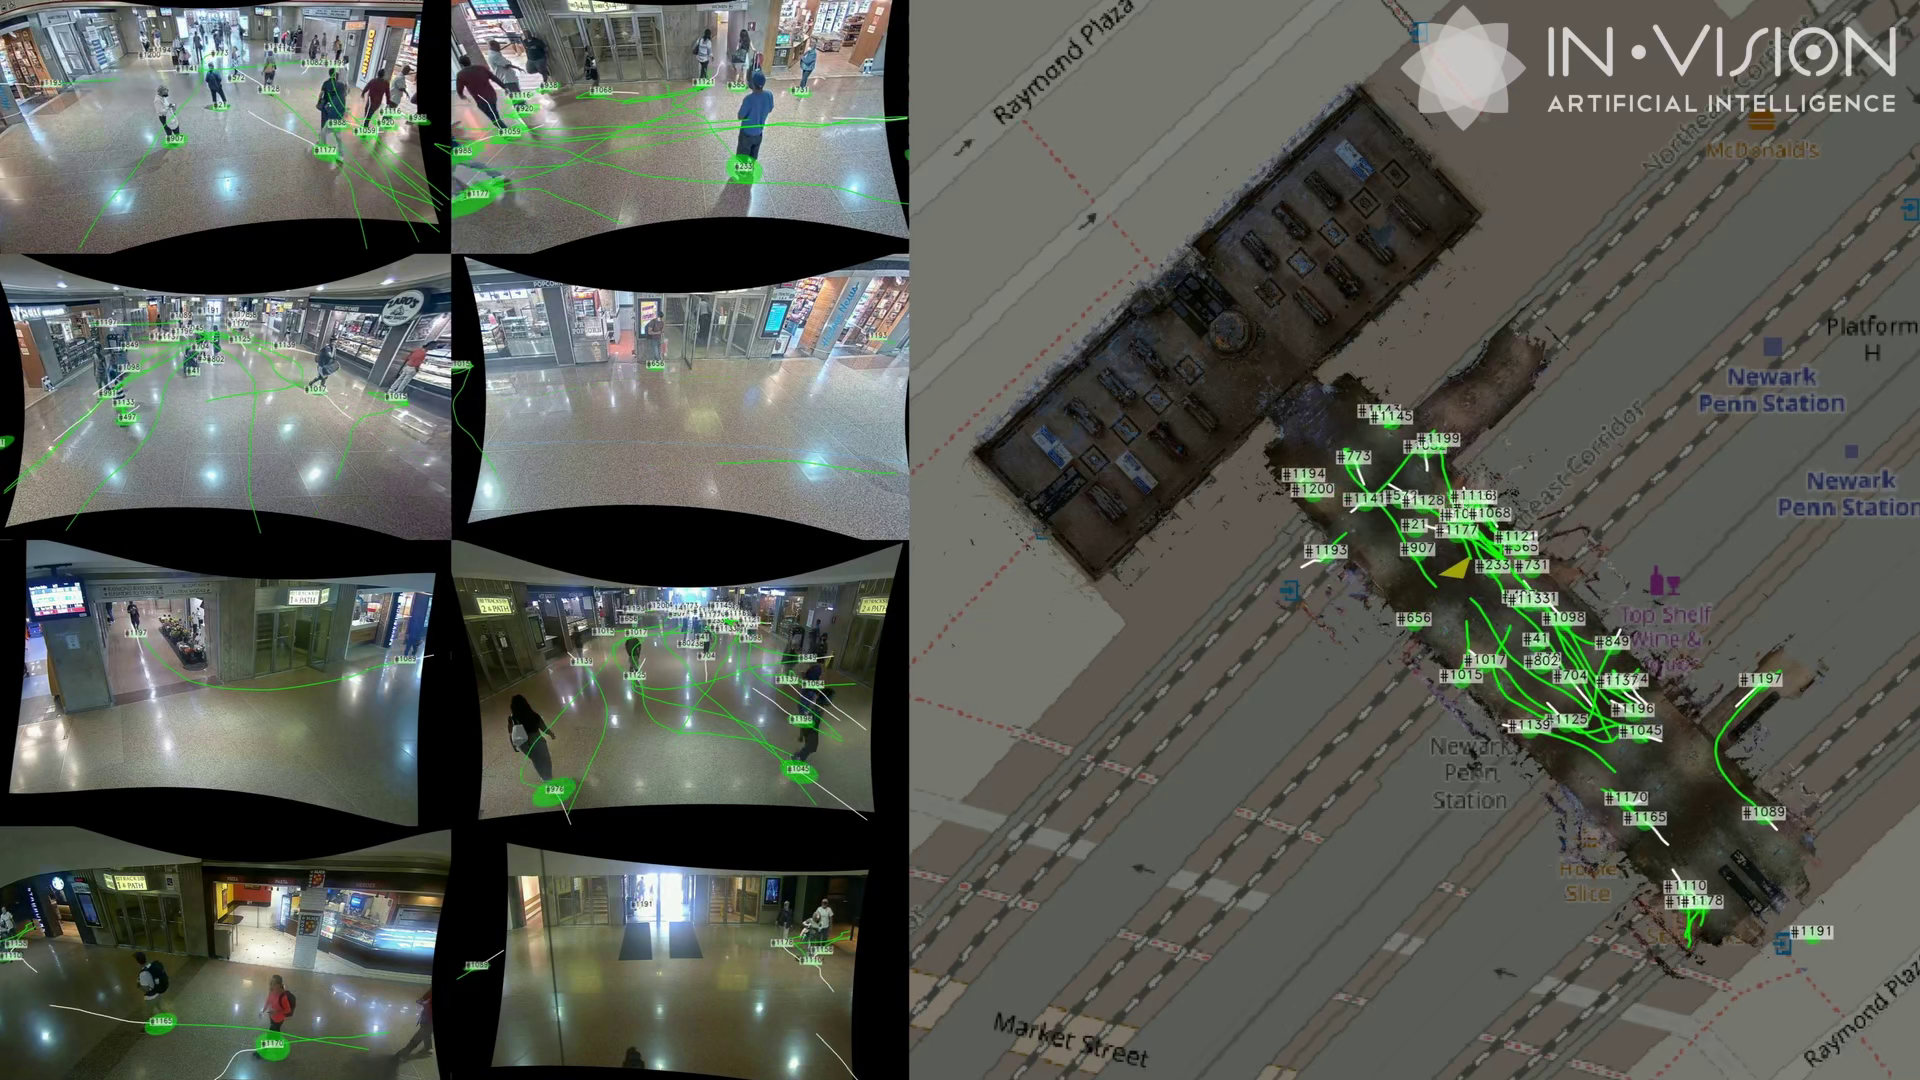 Invision AI geolocalized multi camera tracking at Newark Penn Station in New Jersey